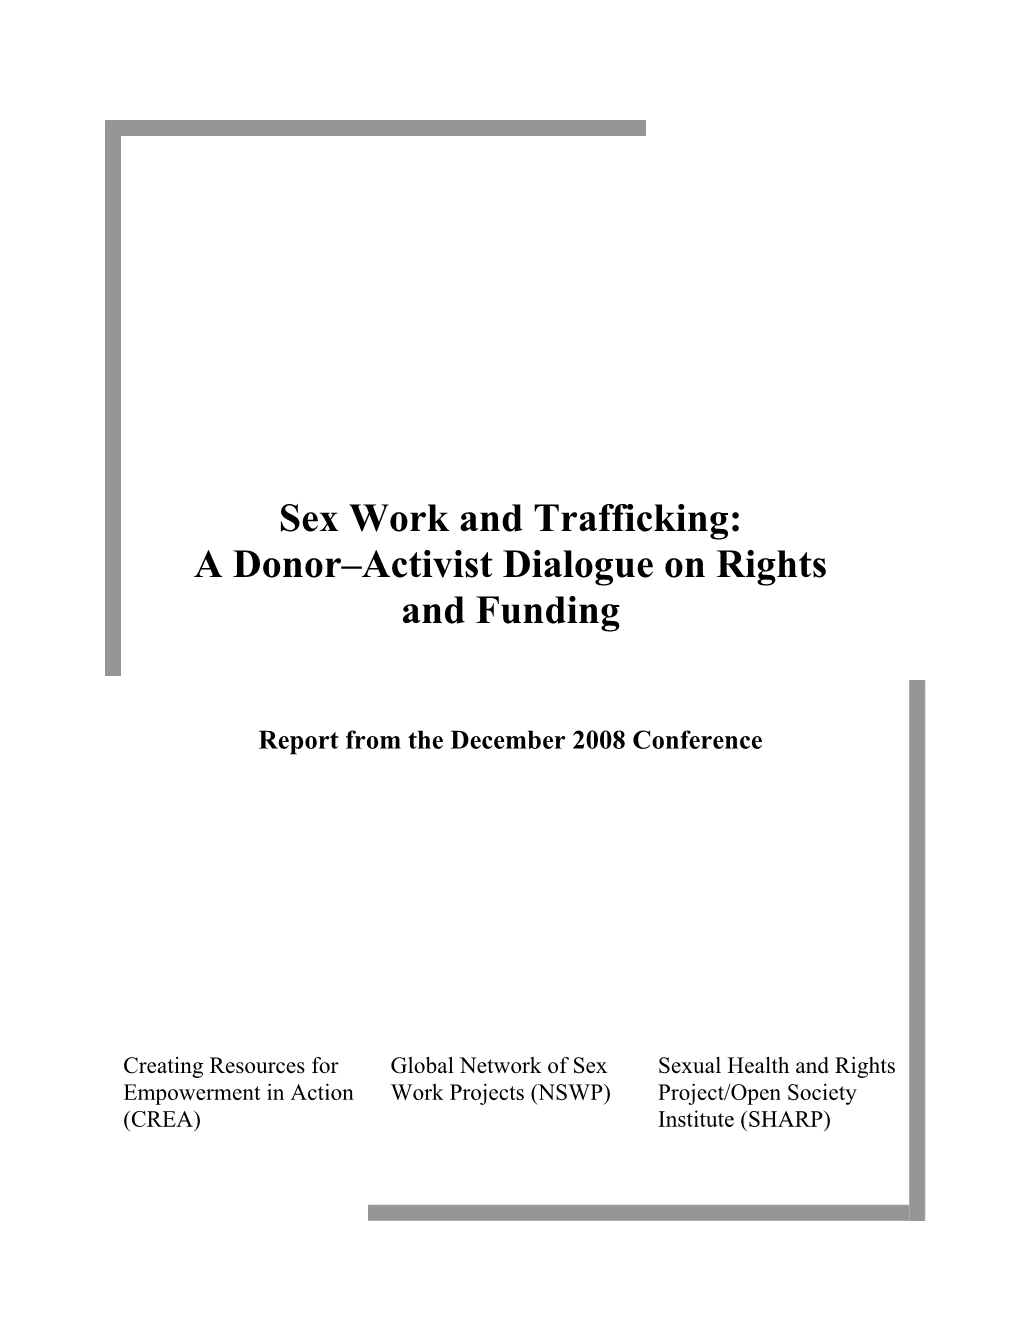 Sex Work and Trafficking: a Donor–Activist Dialogue on Rights and Funding